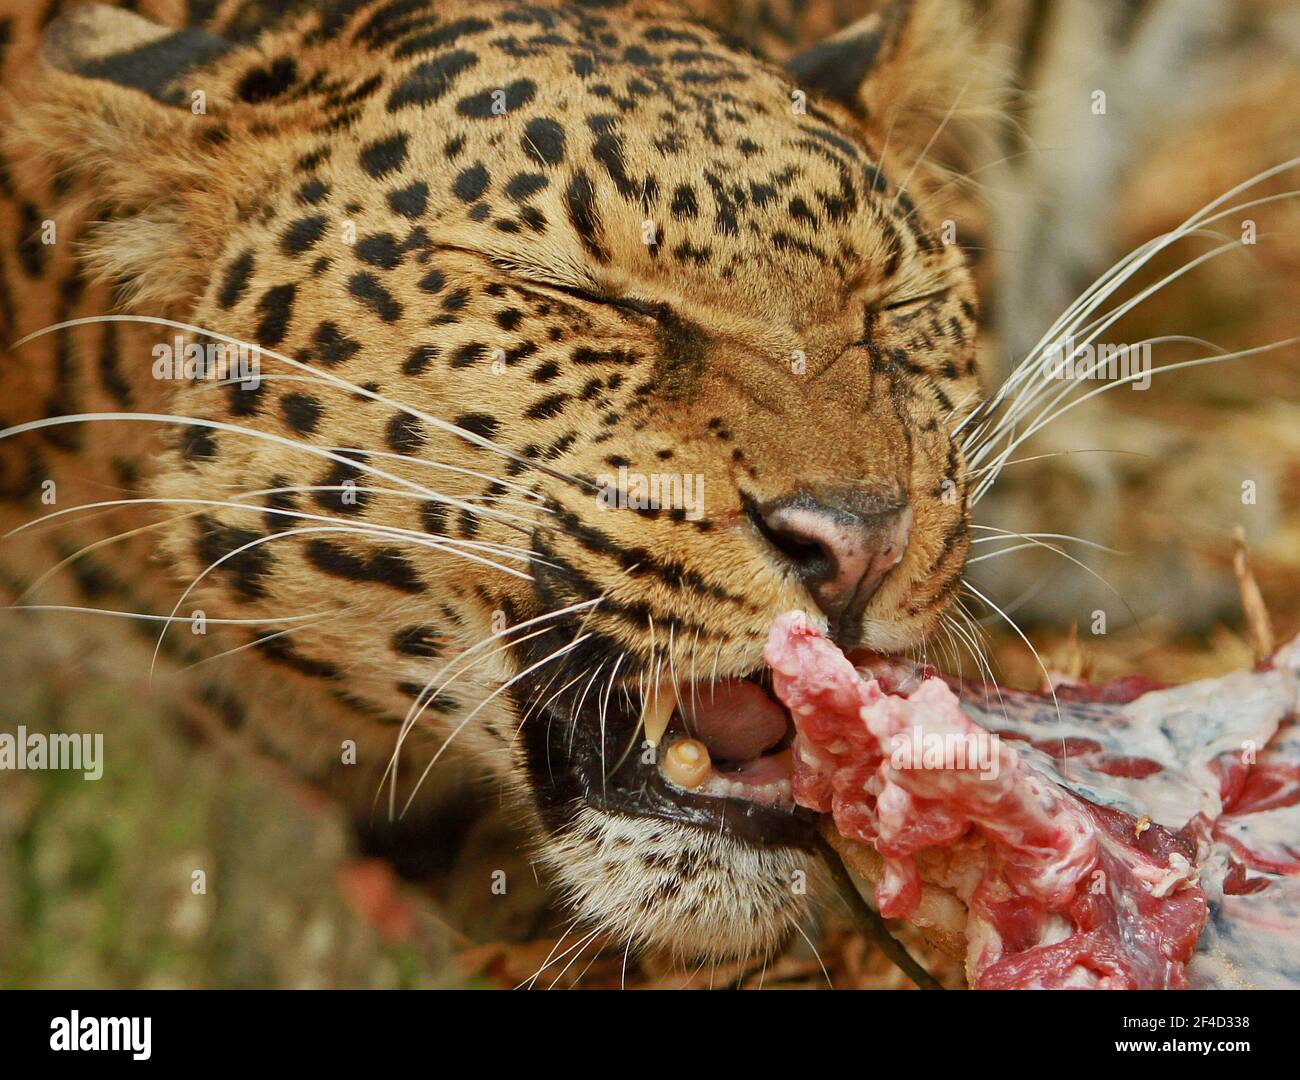 Close up of a Leopard face eating a large piece of meat Stock Photo